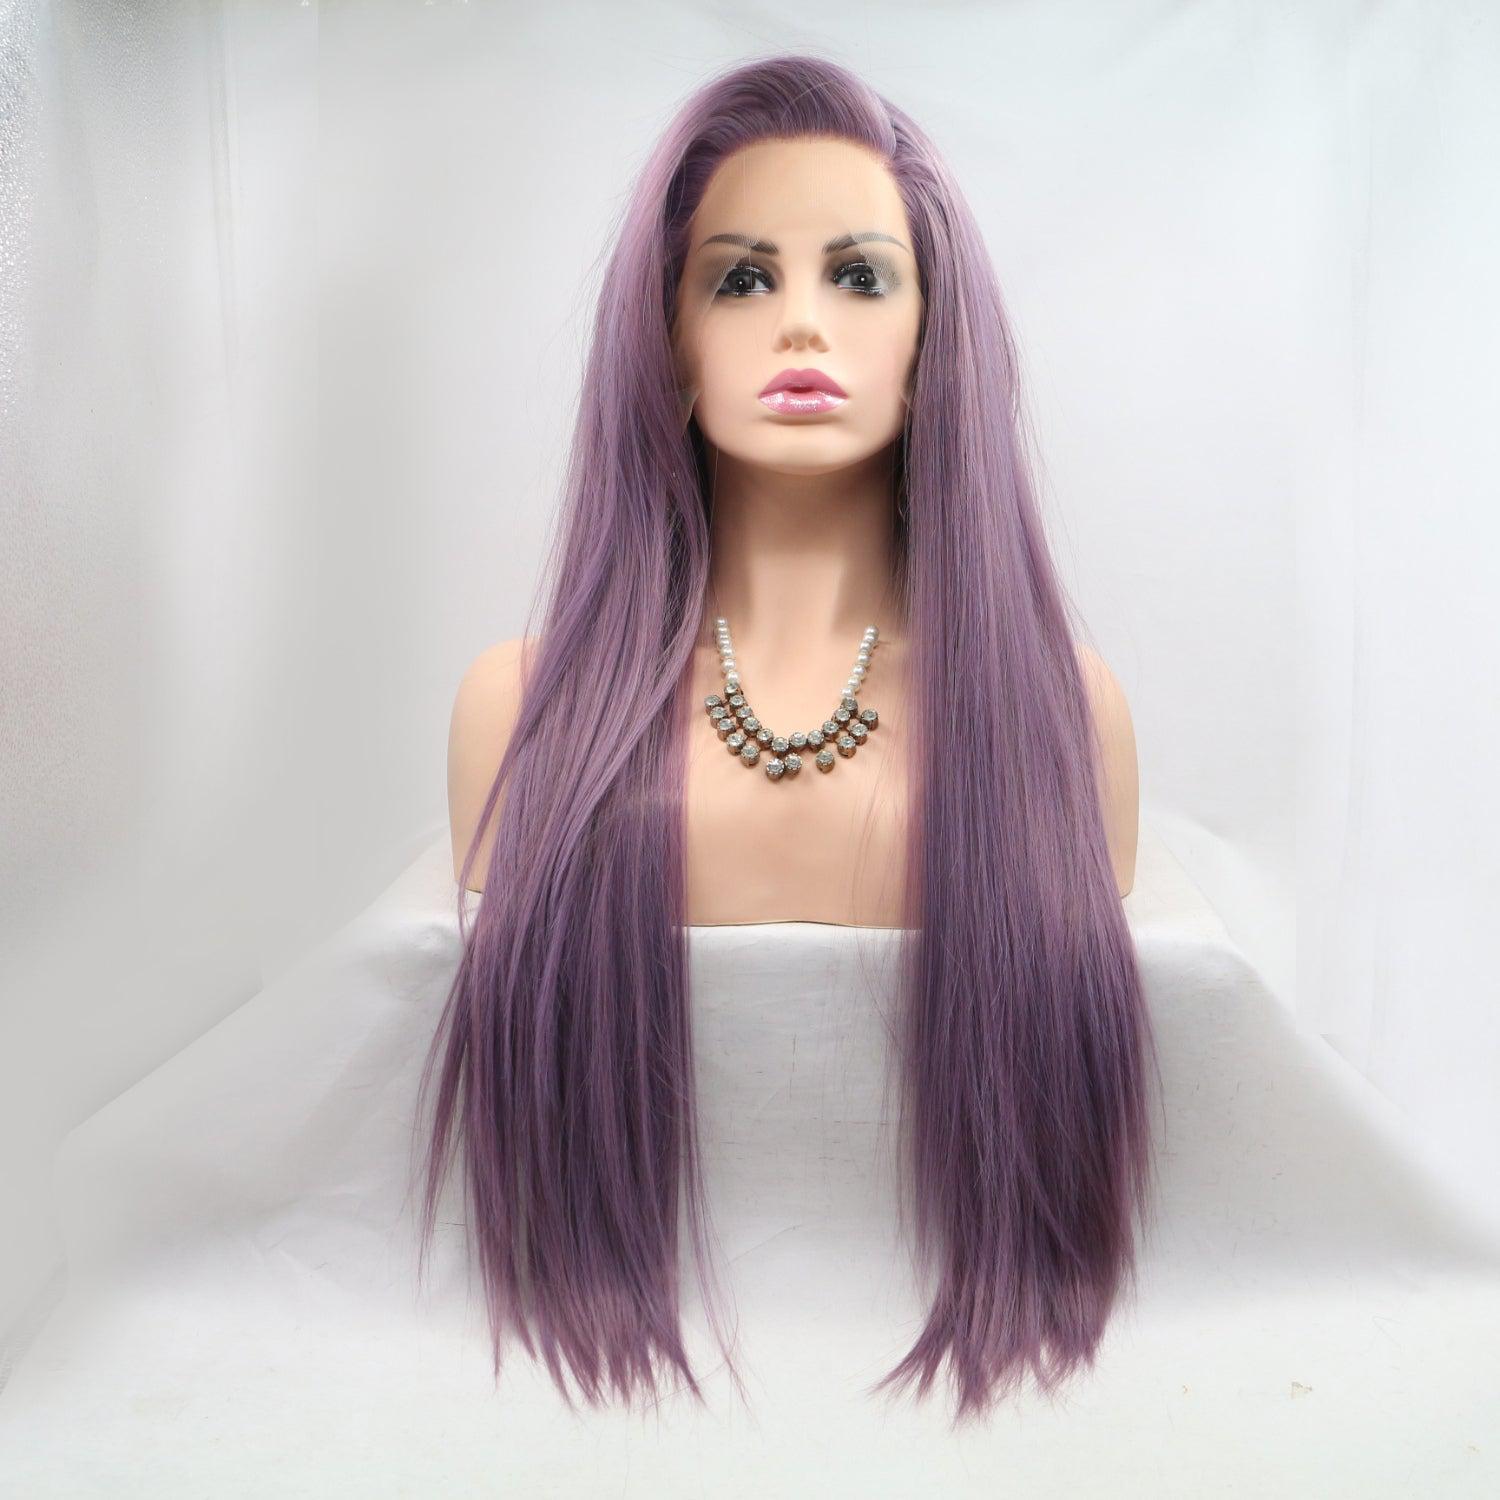 a mannequin head with long purple hair